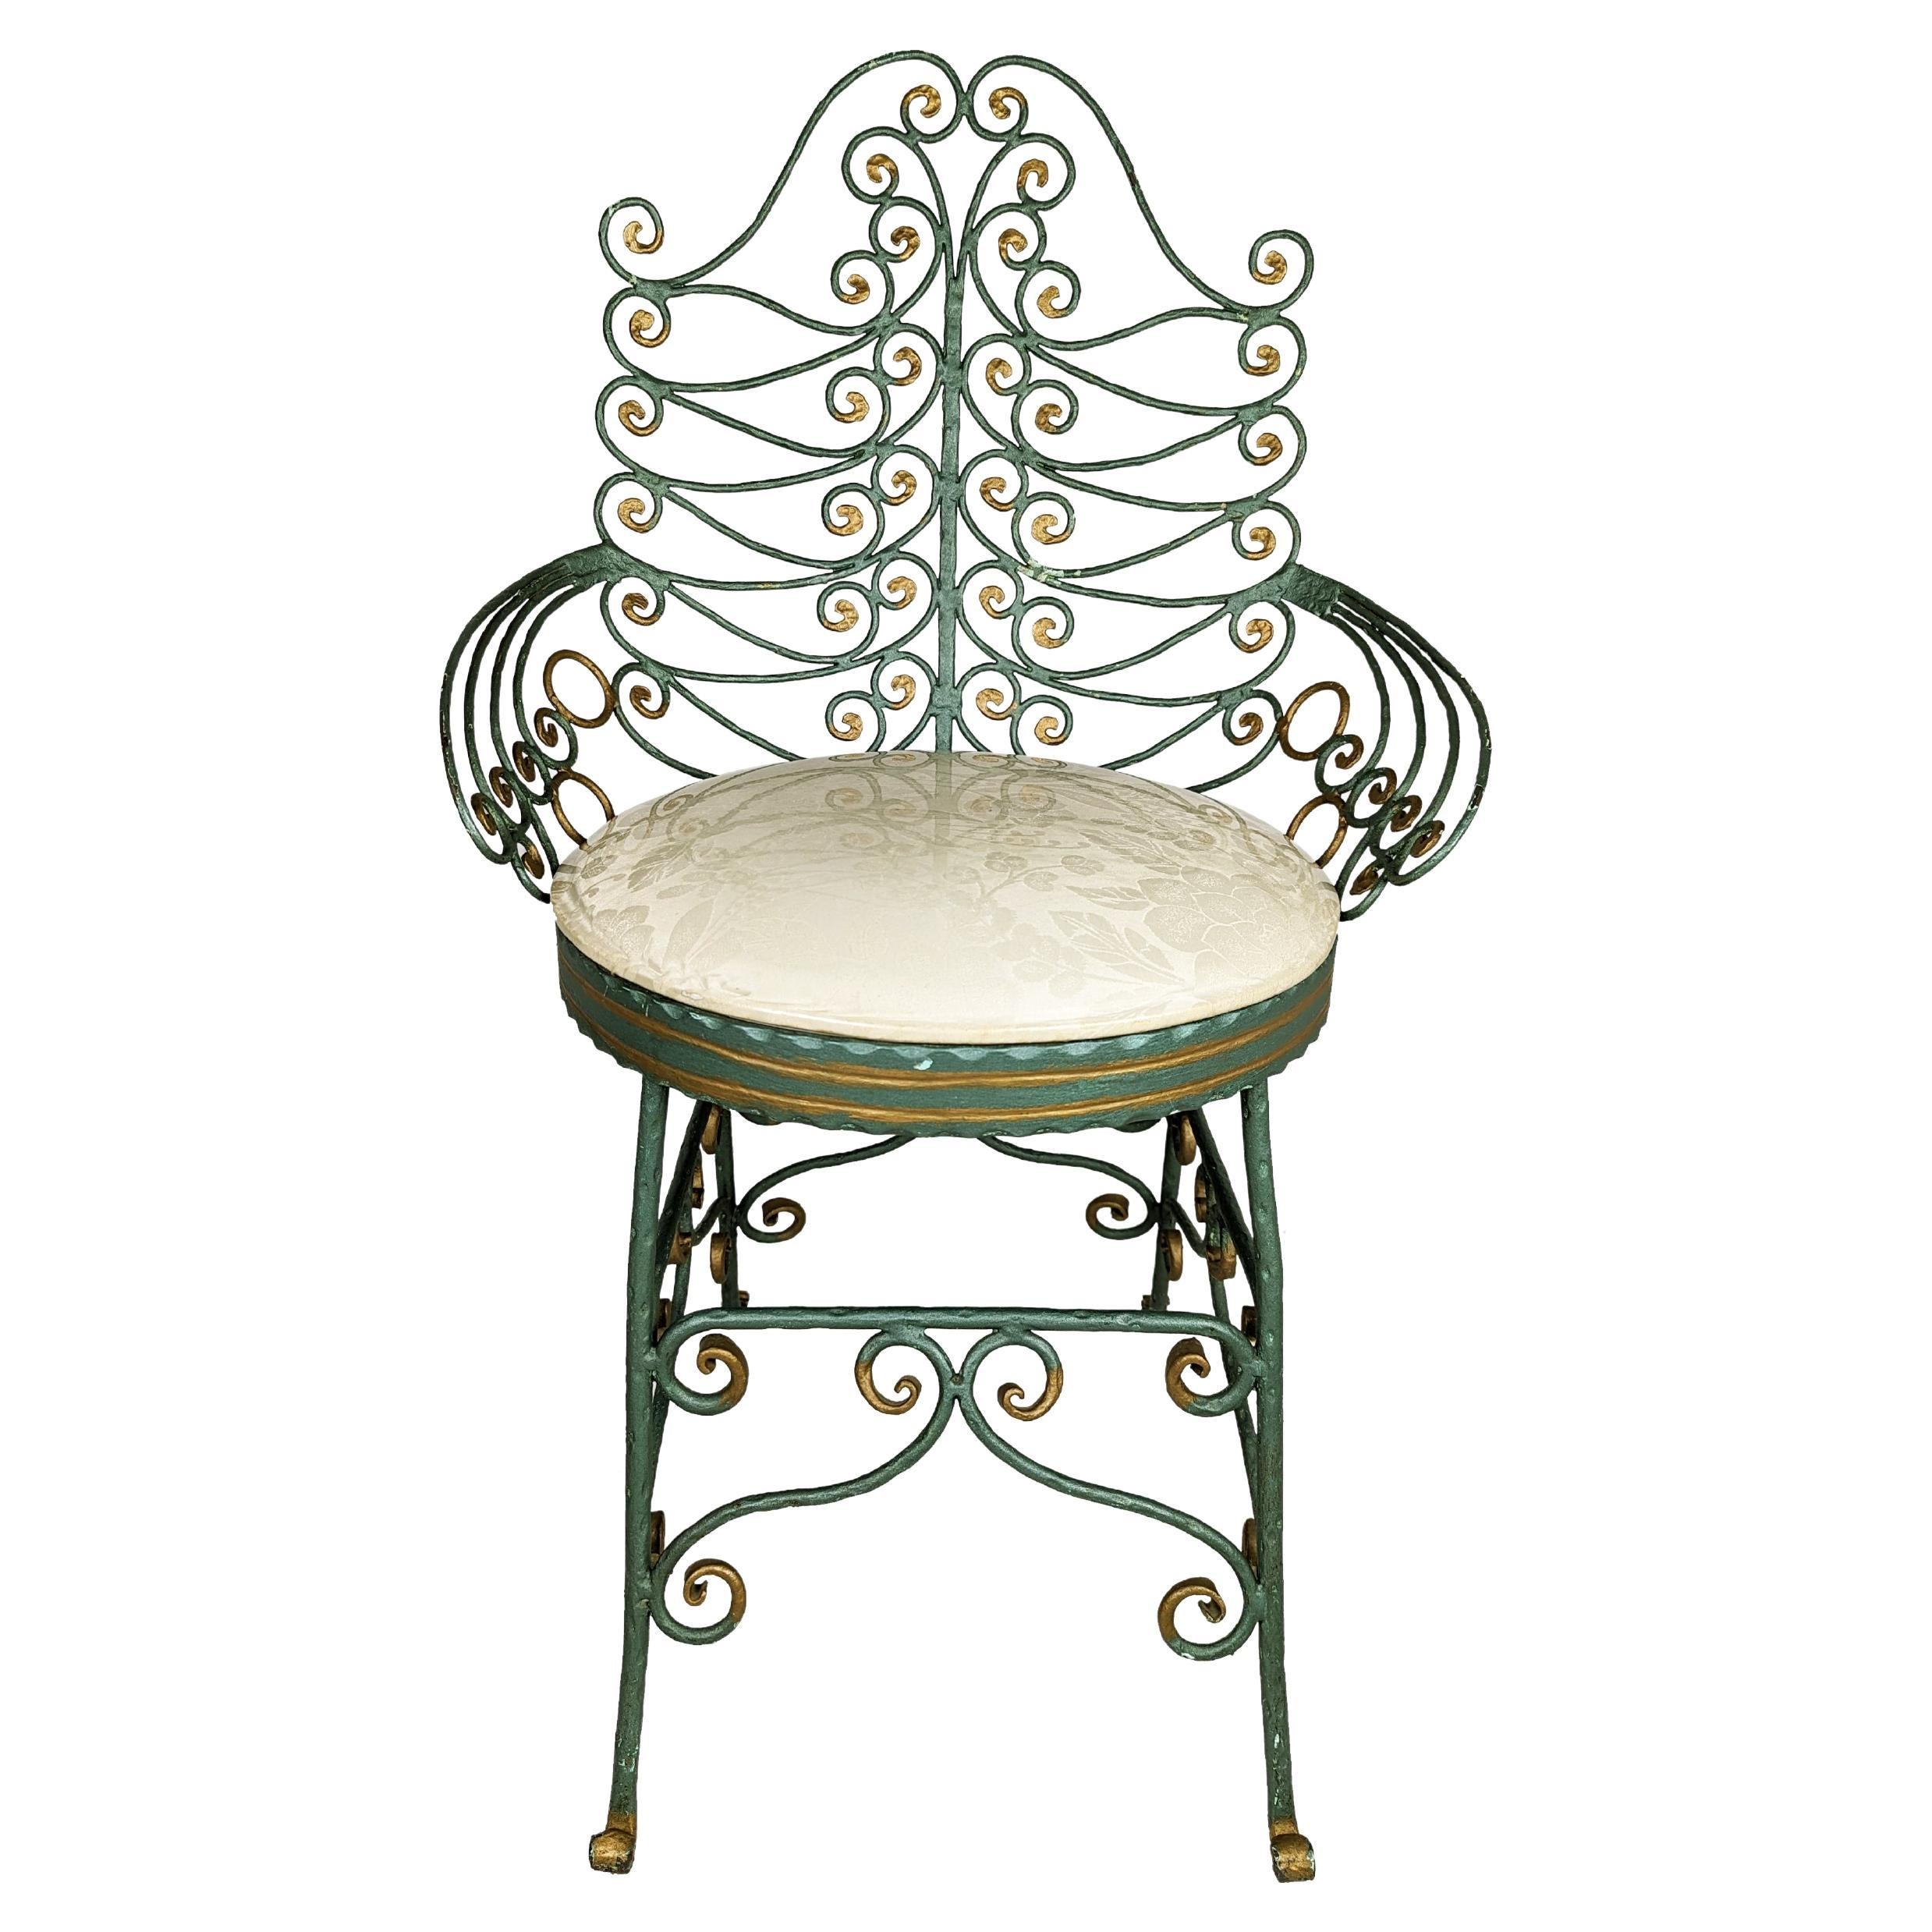 Italian green & gold mid century wrought iron peacock chair For Sale